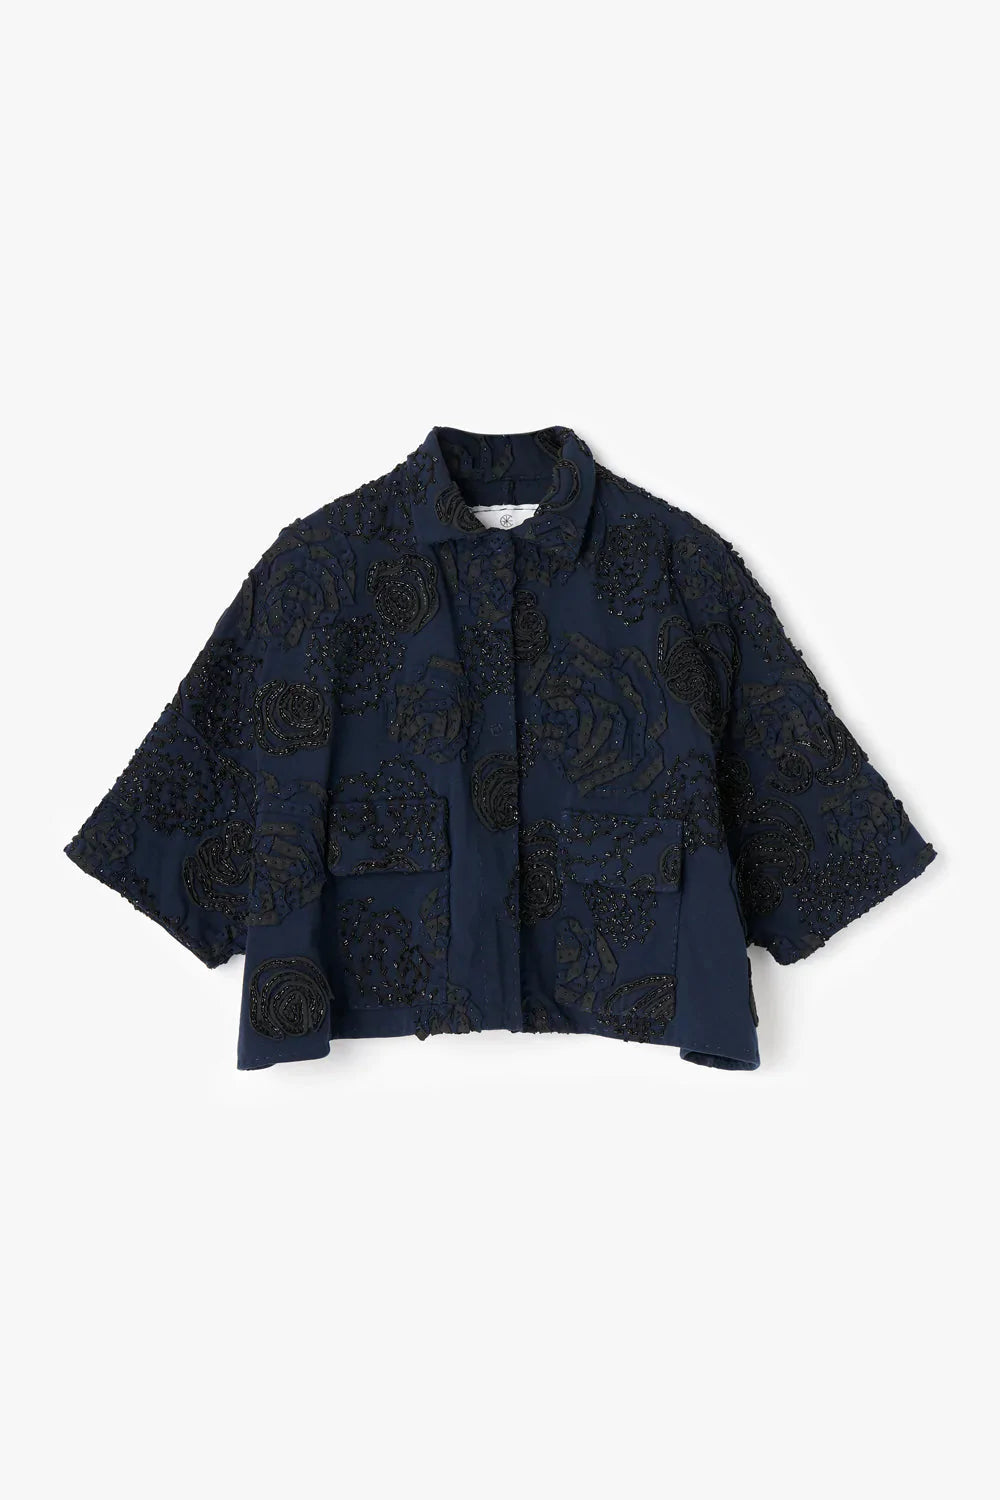 The School of Making Kristina’s Rose Cropped Car Jacket DIY Kit in Black and Navy.